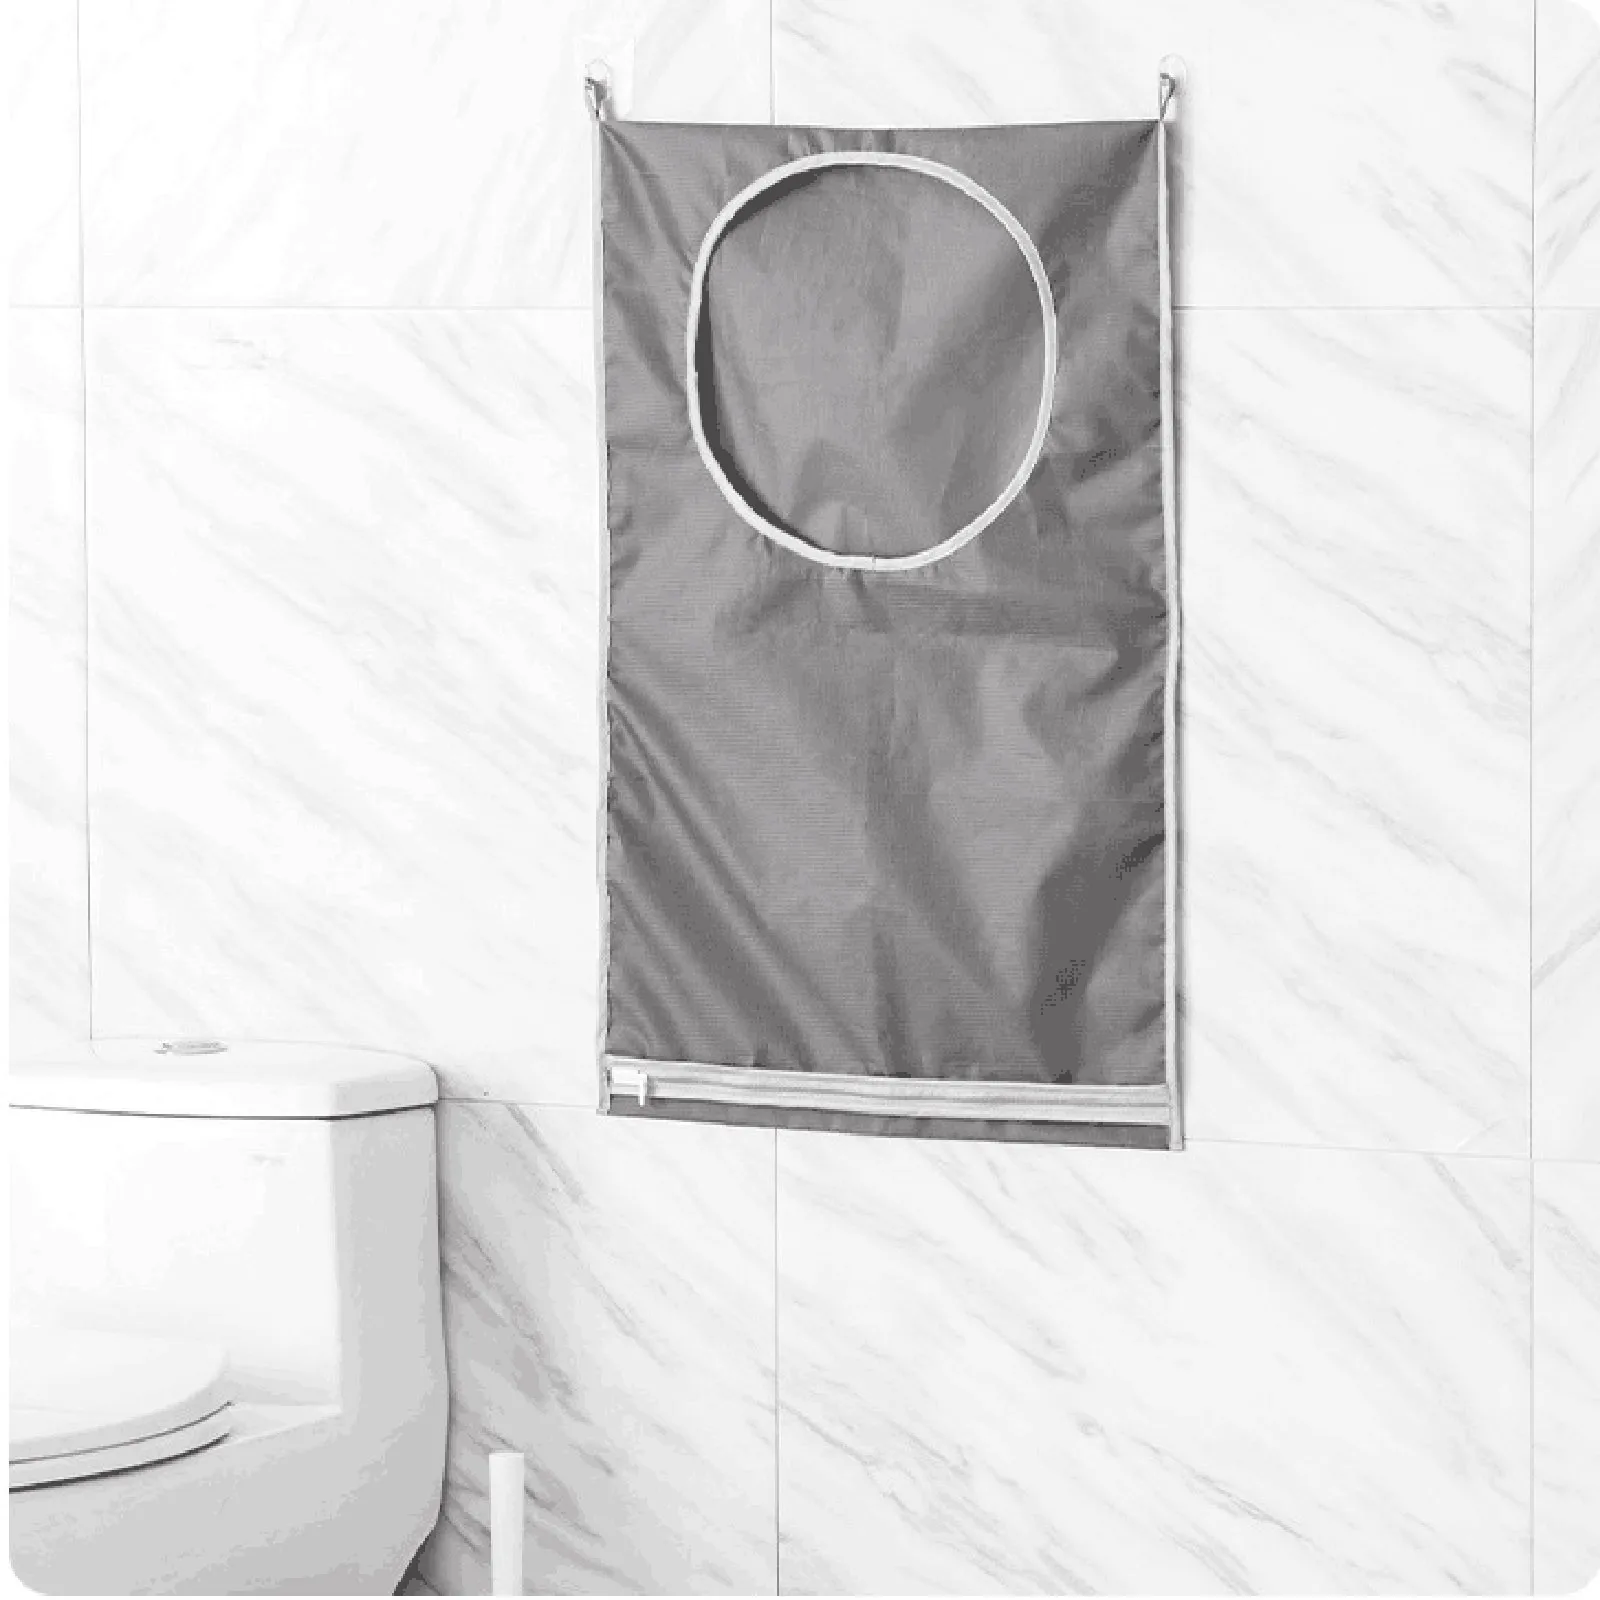 Door Hanging Laundry Bags For Dirty Clothes Washing Machines Wall Mounted Bathroom Storage Bag Hanging Laundry Hamper With Hooks